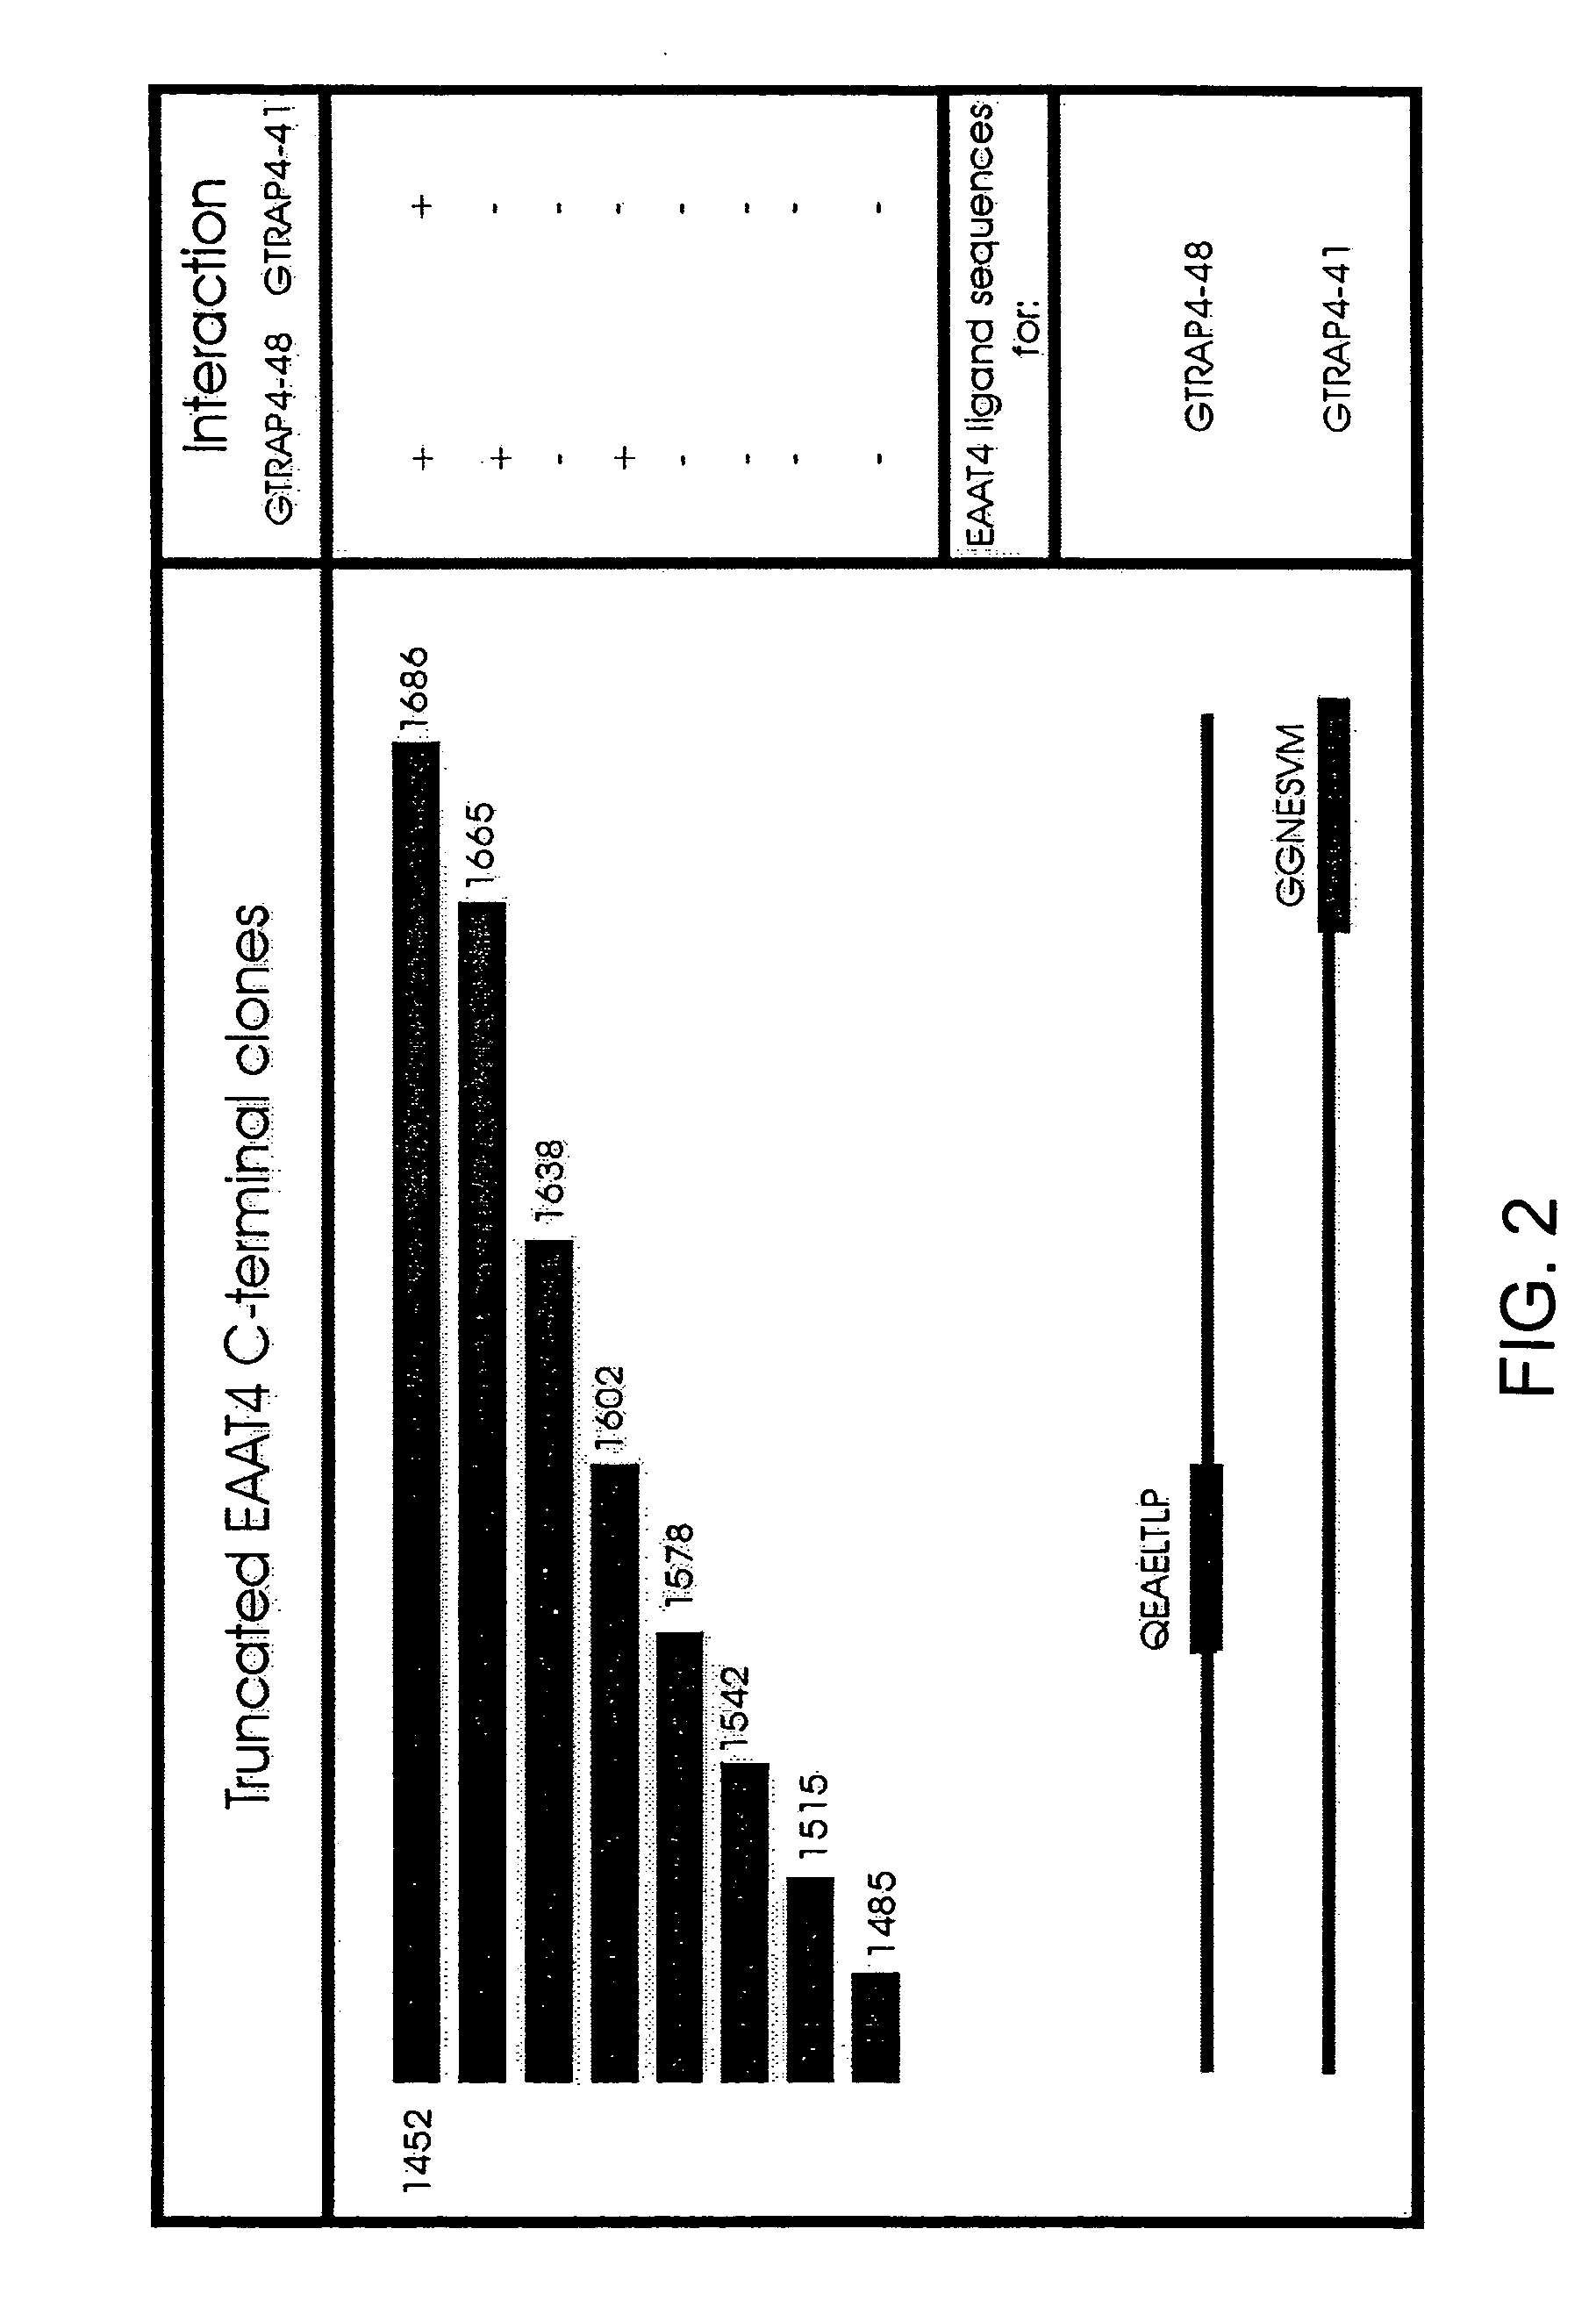 Glutamate transporter associated proteins and methods of use thereof